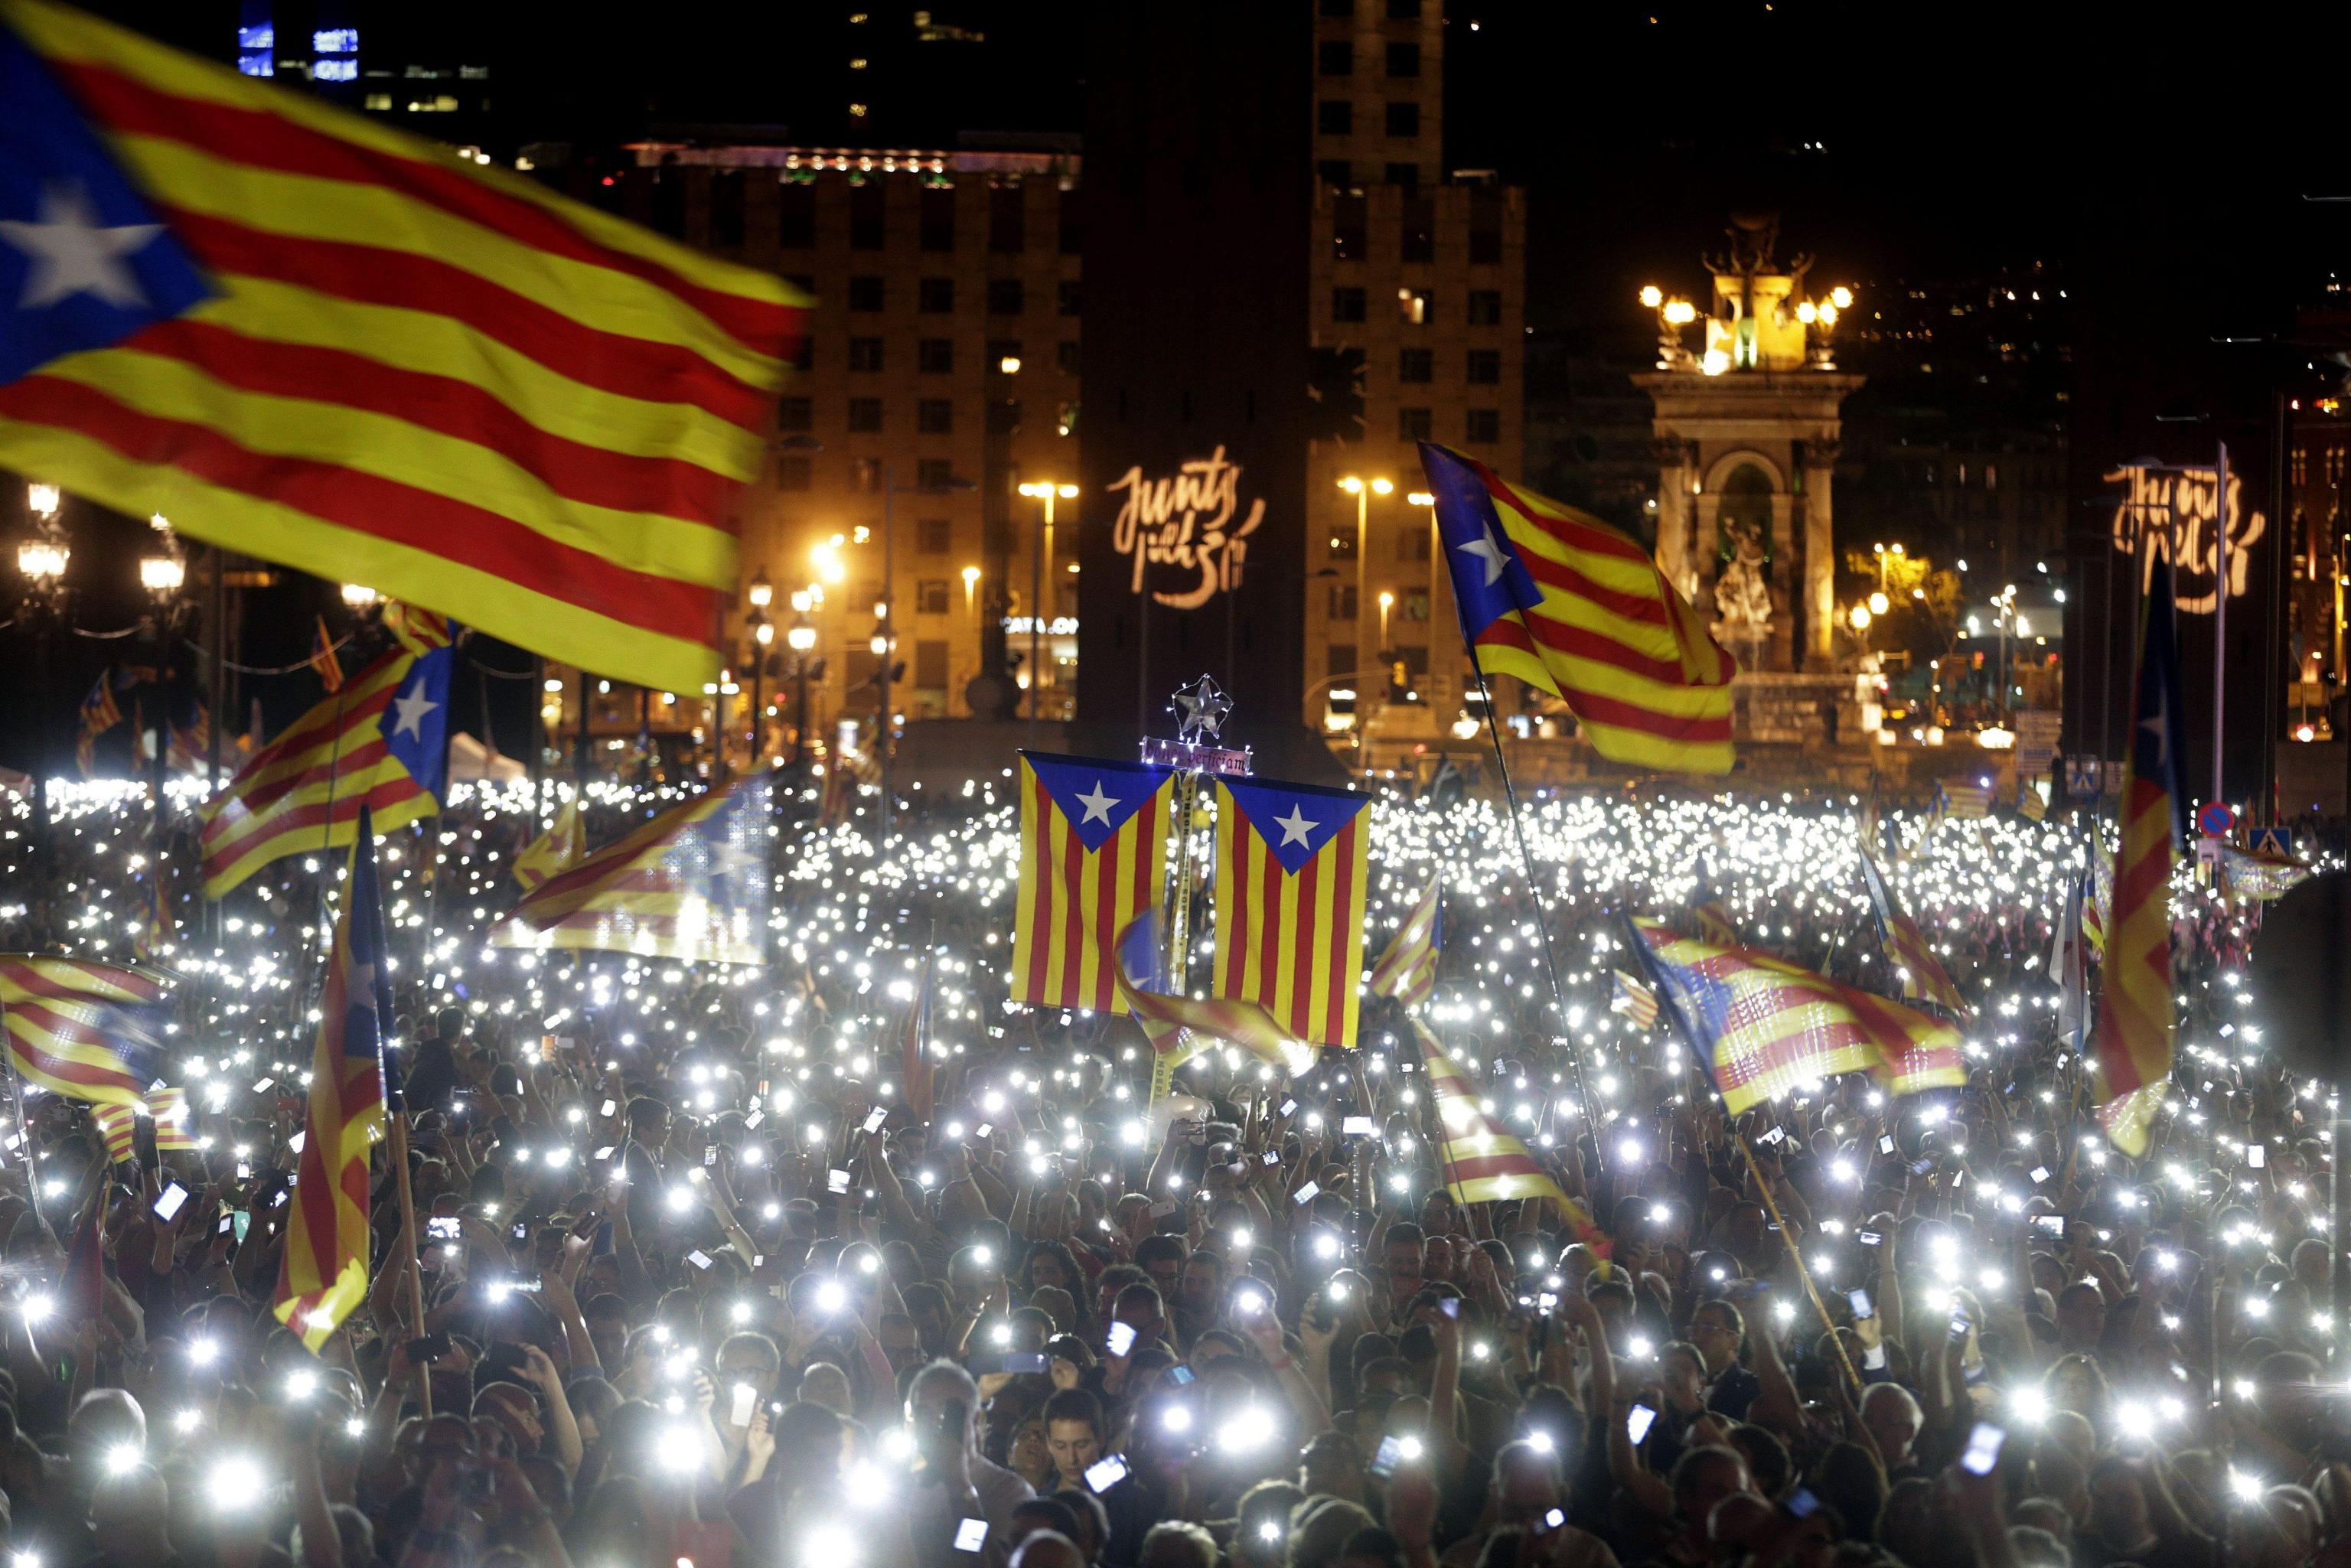 Mobile phones light up the crowd of people attending the last leg of the election campaign of the pro-sovereignty bloc 'Junts pel Si' (Together for the Yes) in Barcelona